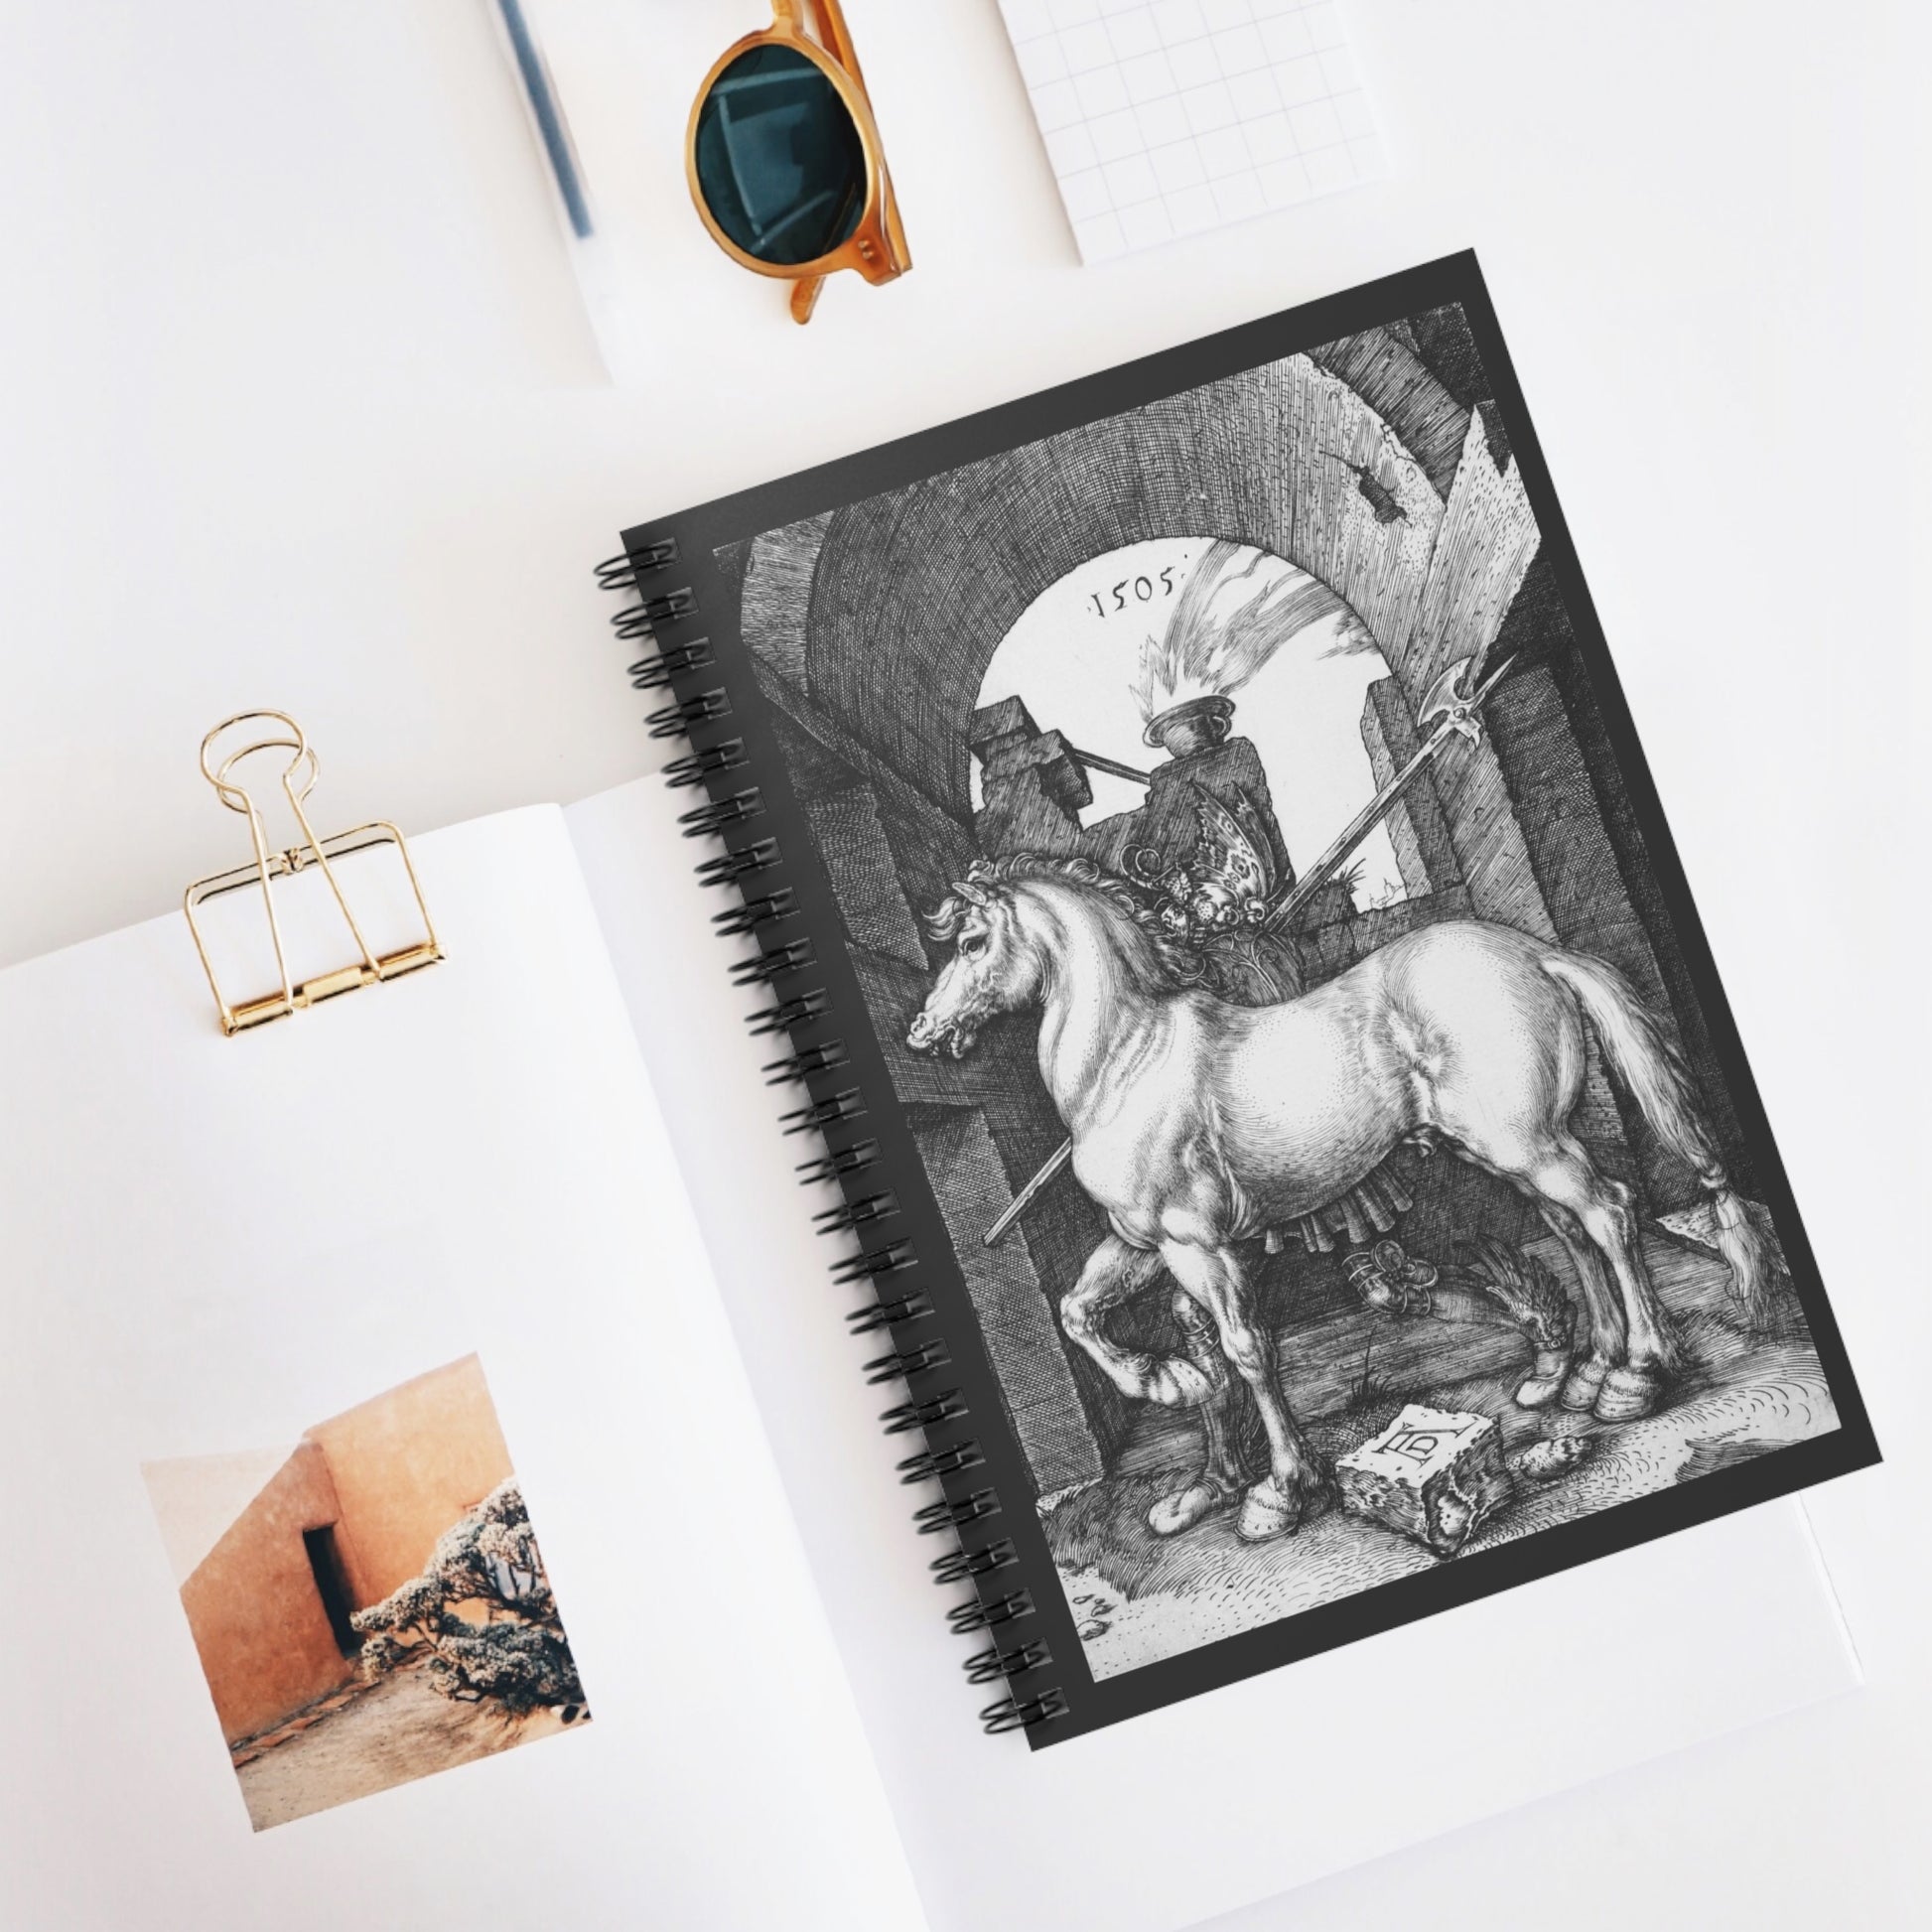 Spiral notebook with Albrecht Durer's 1505 engraving "The Little Horse" on the front.